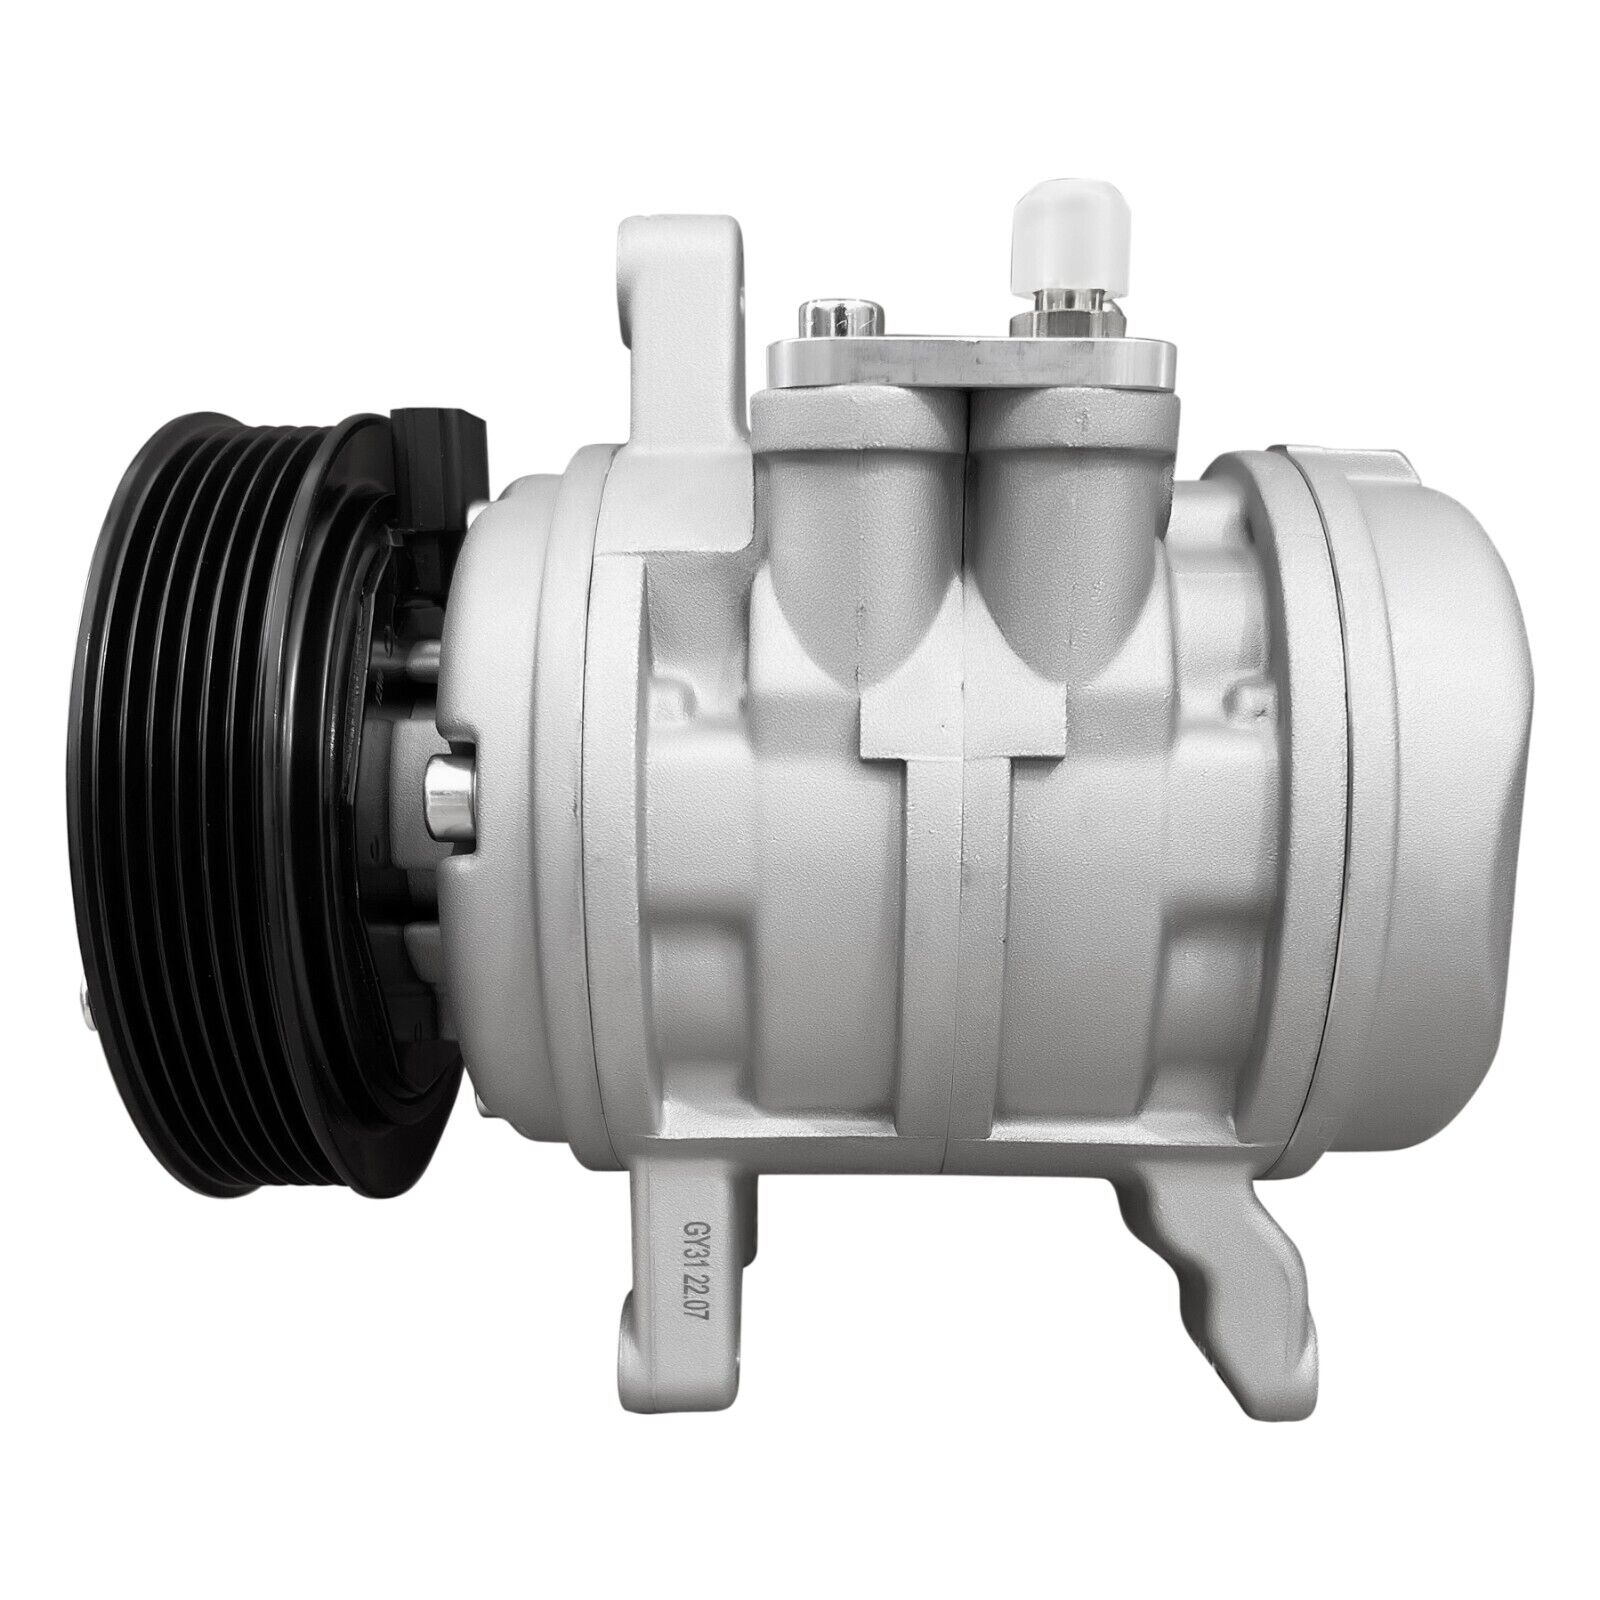 RYC New AC Compressor EH388 Fits Ford Mustang 5.0L 1992 1993